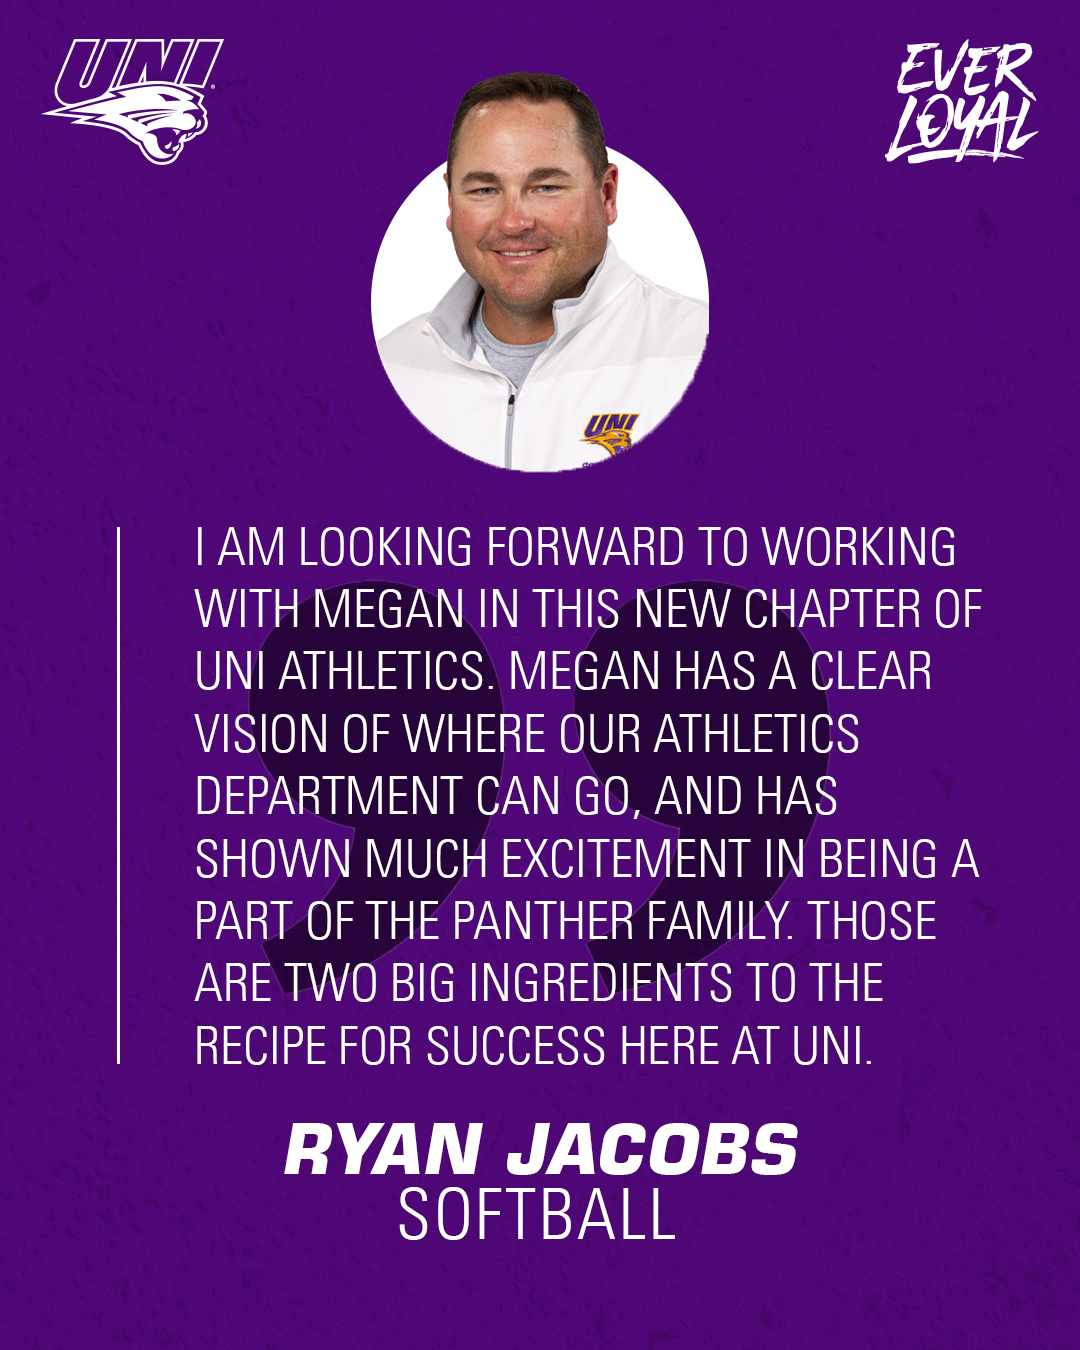 Ryan Jacobs: "I am looking forward to working with Megan in this new chapter of UNI Athletics. Megan has a clear vision of where our athletics department can go, and has shown much excitement in being a part of the Panther family. Those are two big ingredients to the recipe for success here at UNI."